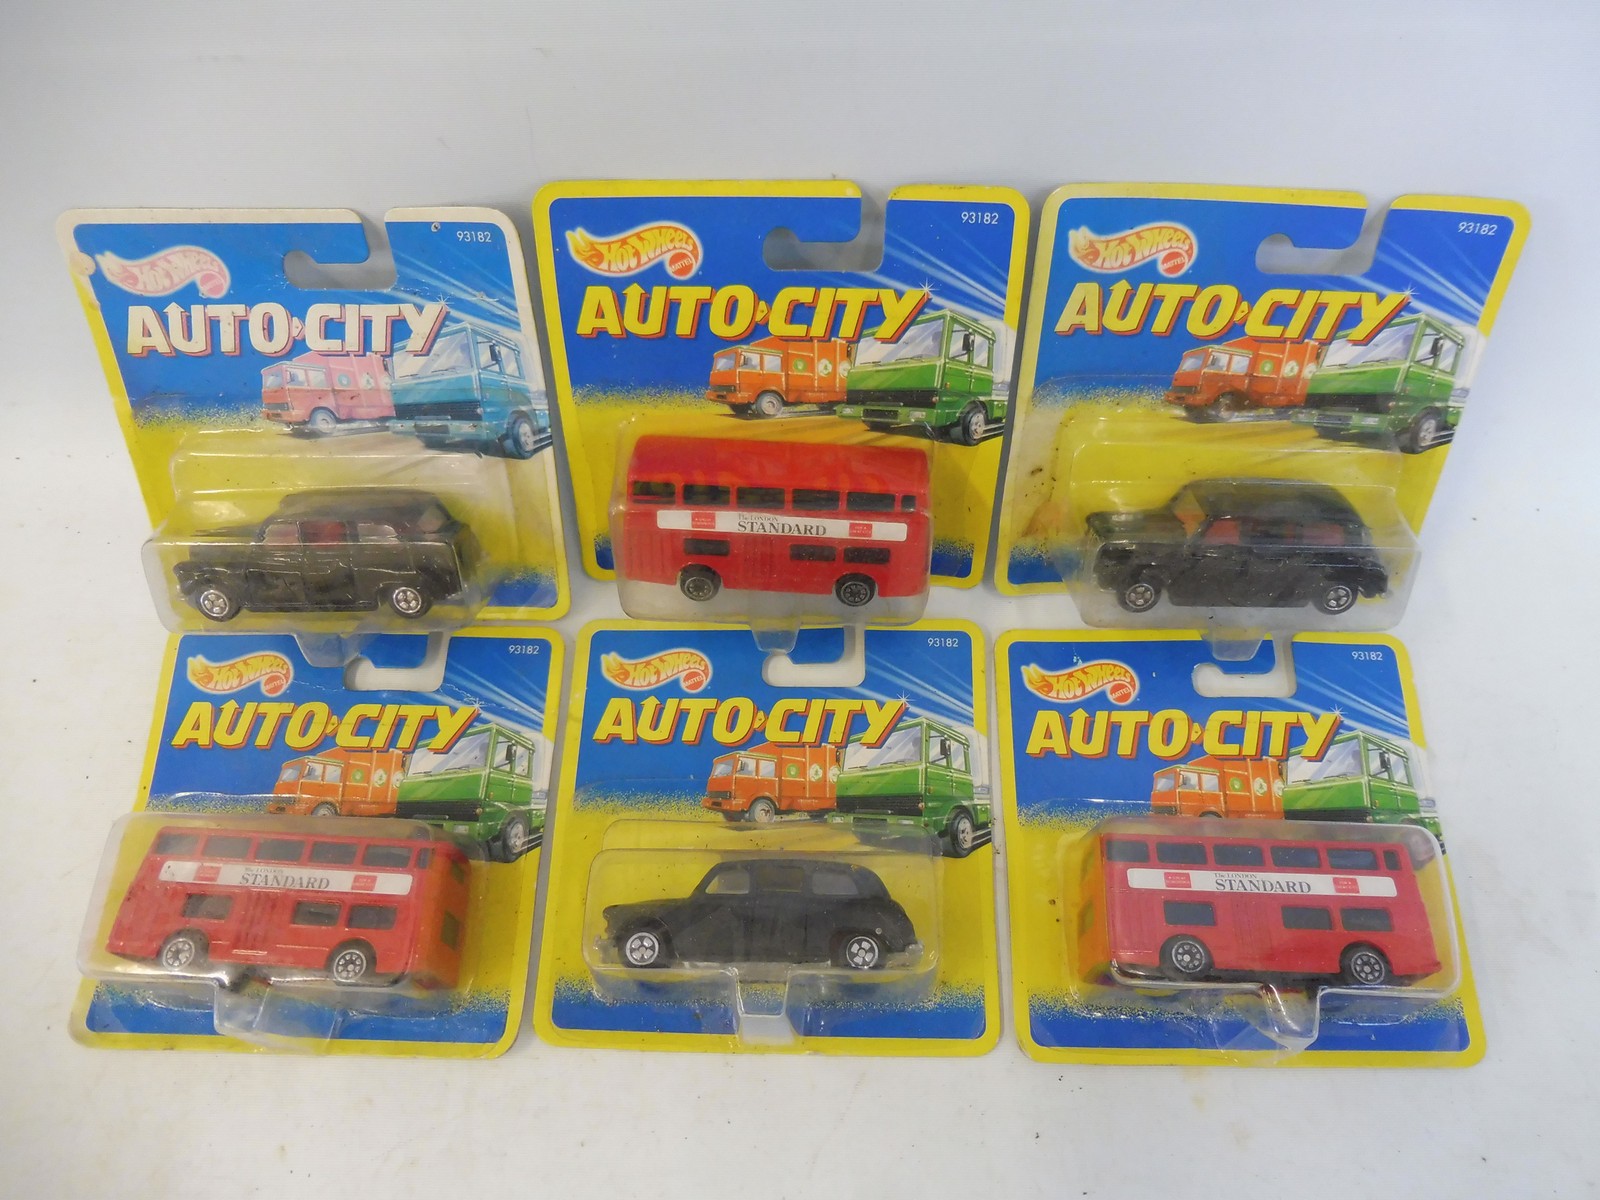 Six assorted Hot Wheels carded Auto City, to include London taxis and buses.